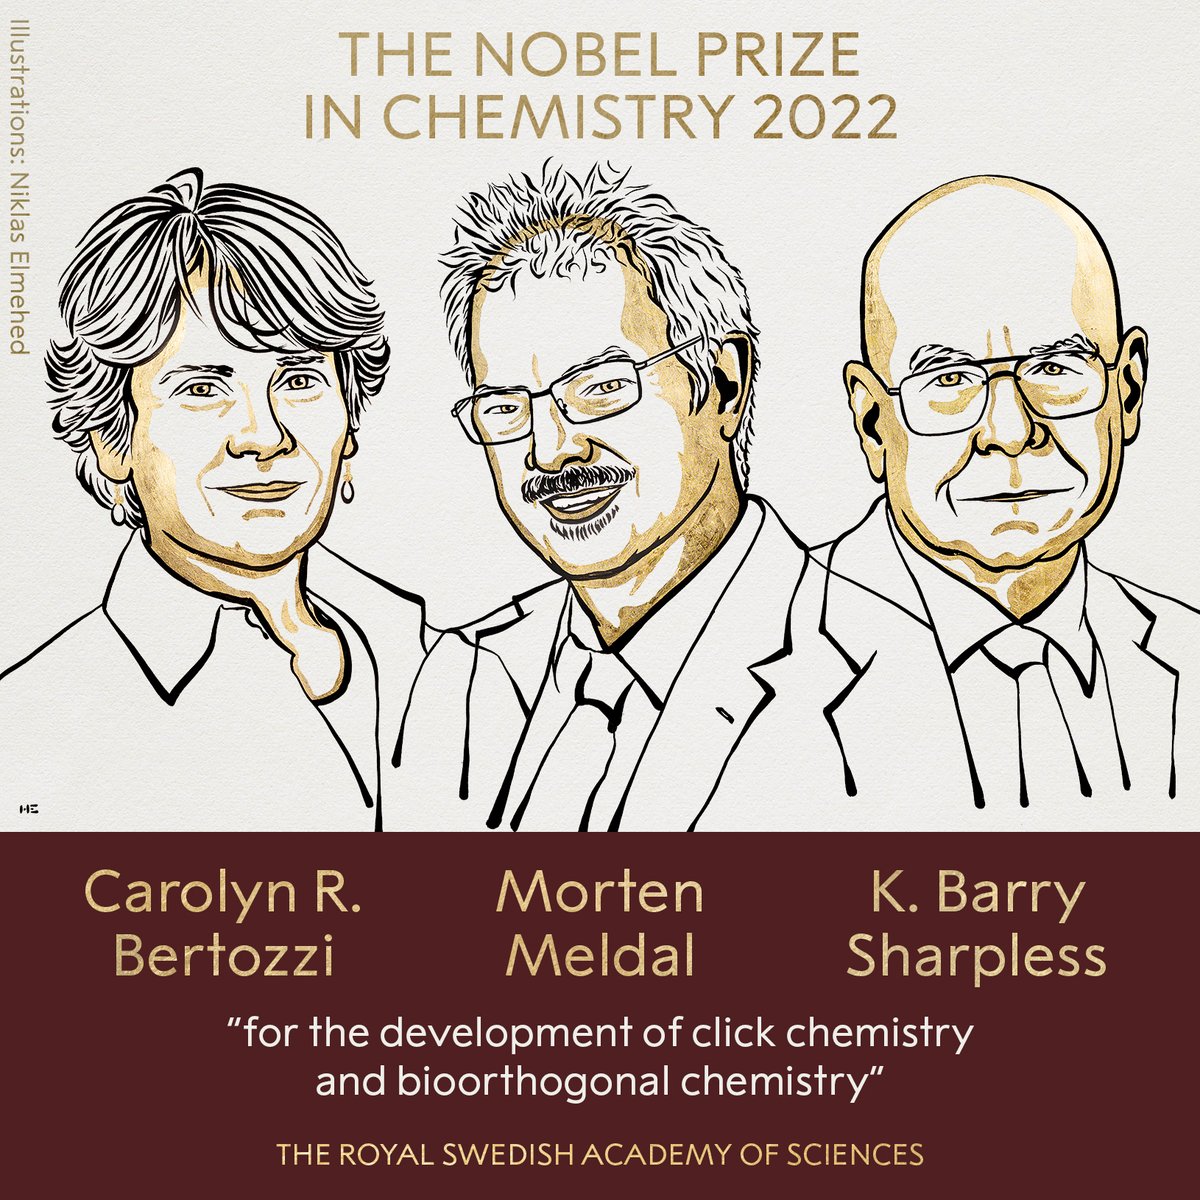 Nobel Prize in Chemistry to 3 scientists, One of them a woman, Literature category announced tomorrow